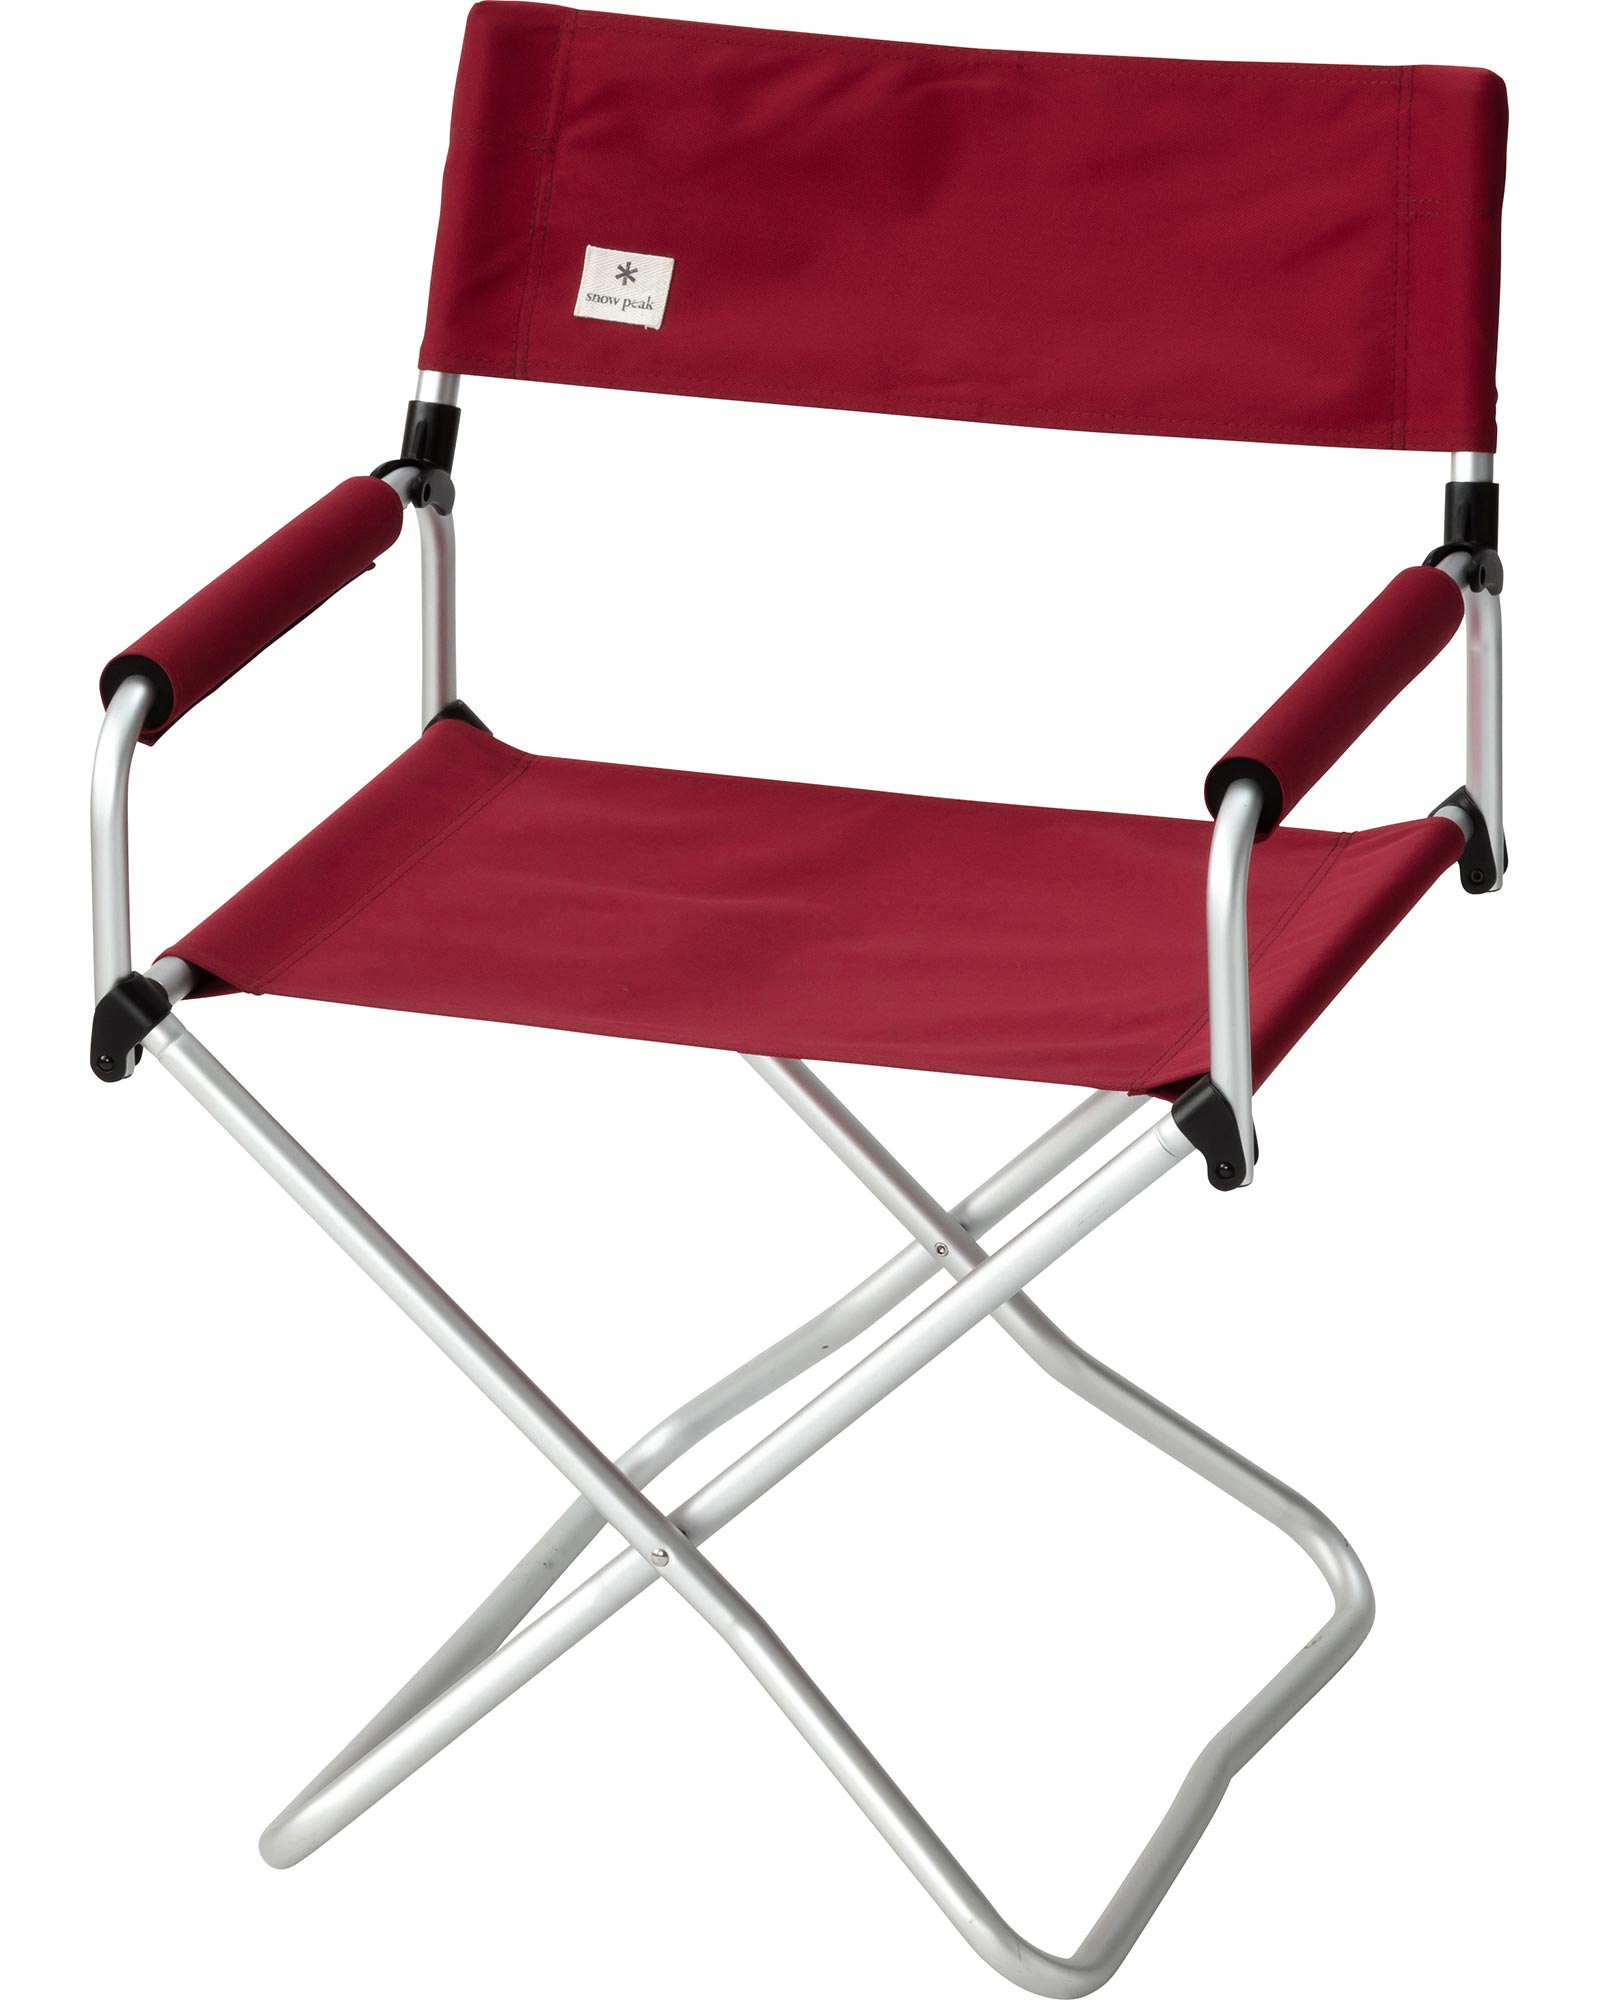 Product image of Snow Peak Folding Chair